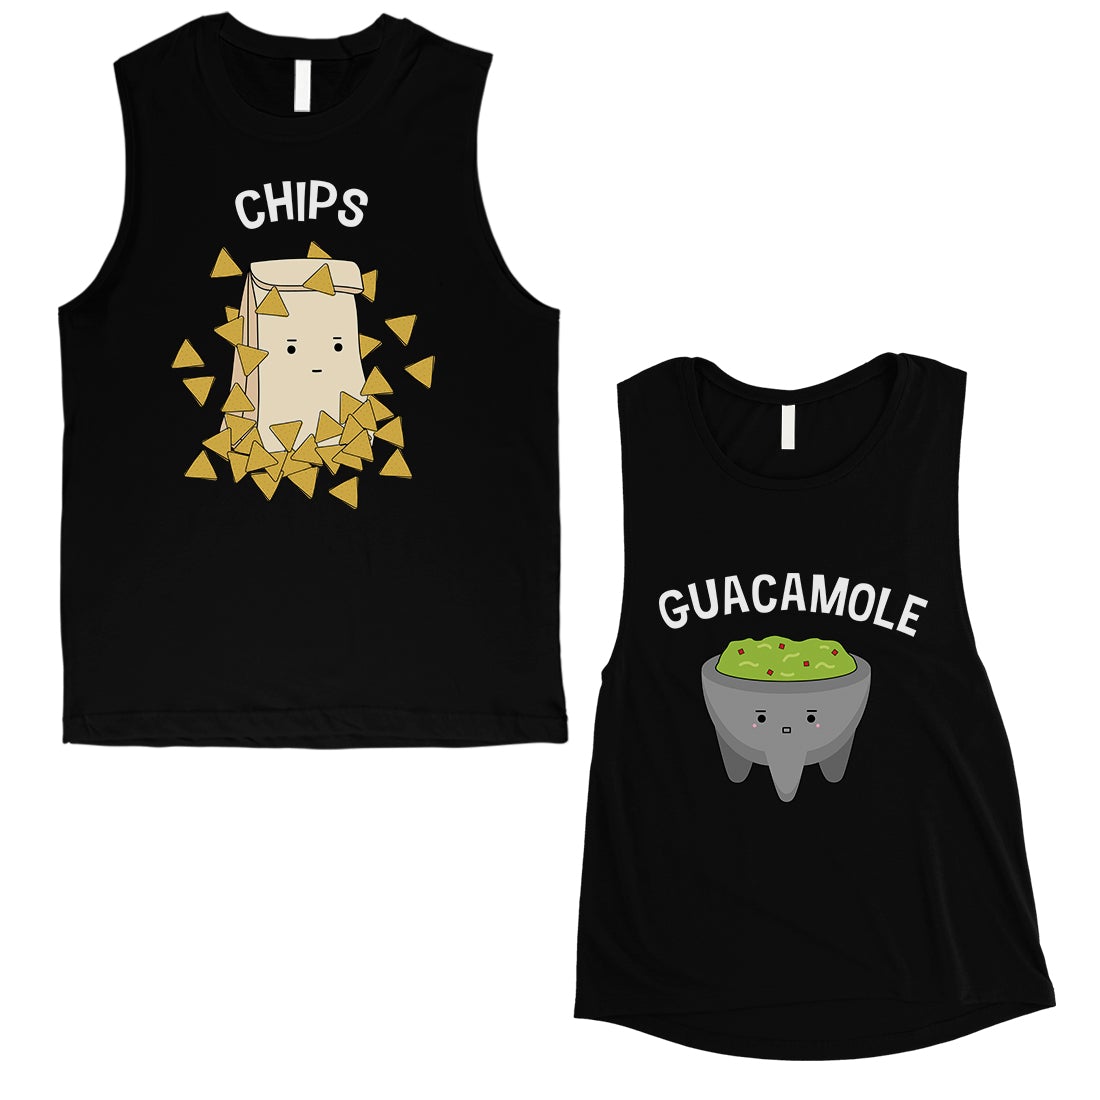 Chips & Guacamole Matching Muscle Tank Tops Funny Wedding Gift Black